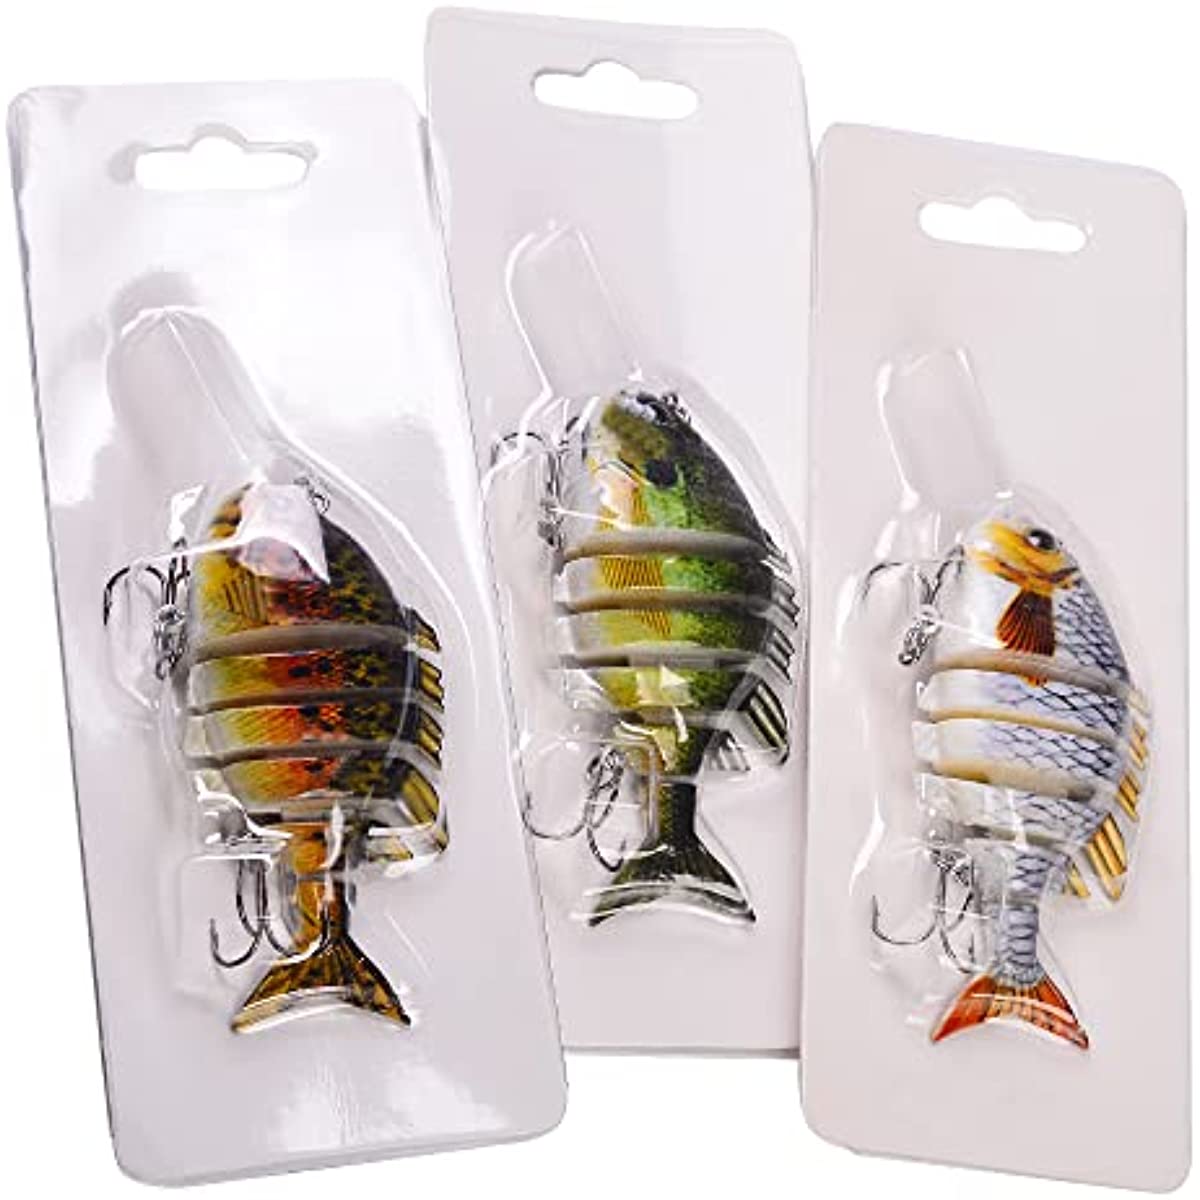  RTLR Simulation Lure Bait Saltwater Fishing Bait with Double  Hook 3D Patterns (Gold and Blue) : Sports & Outdoors